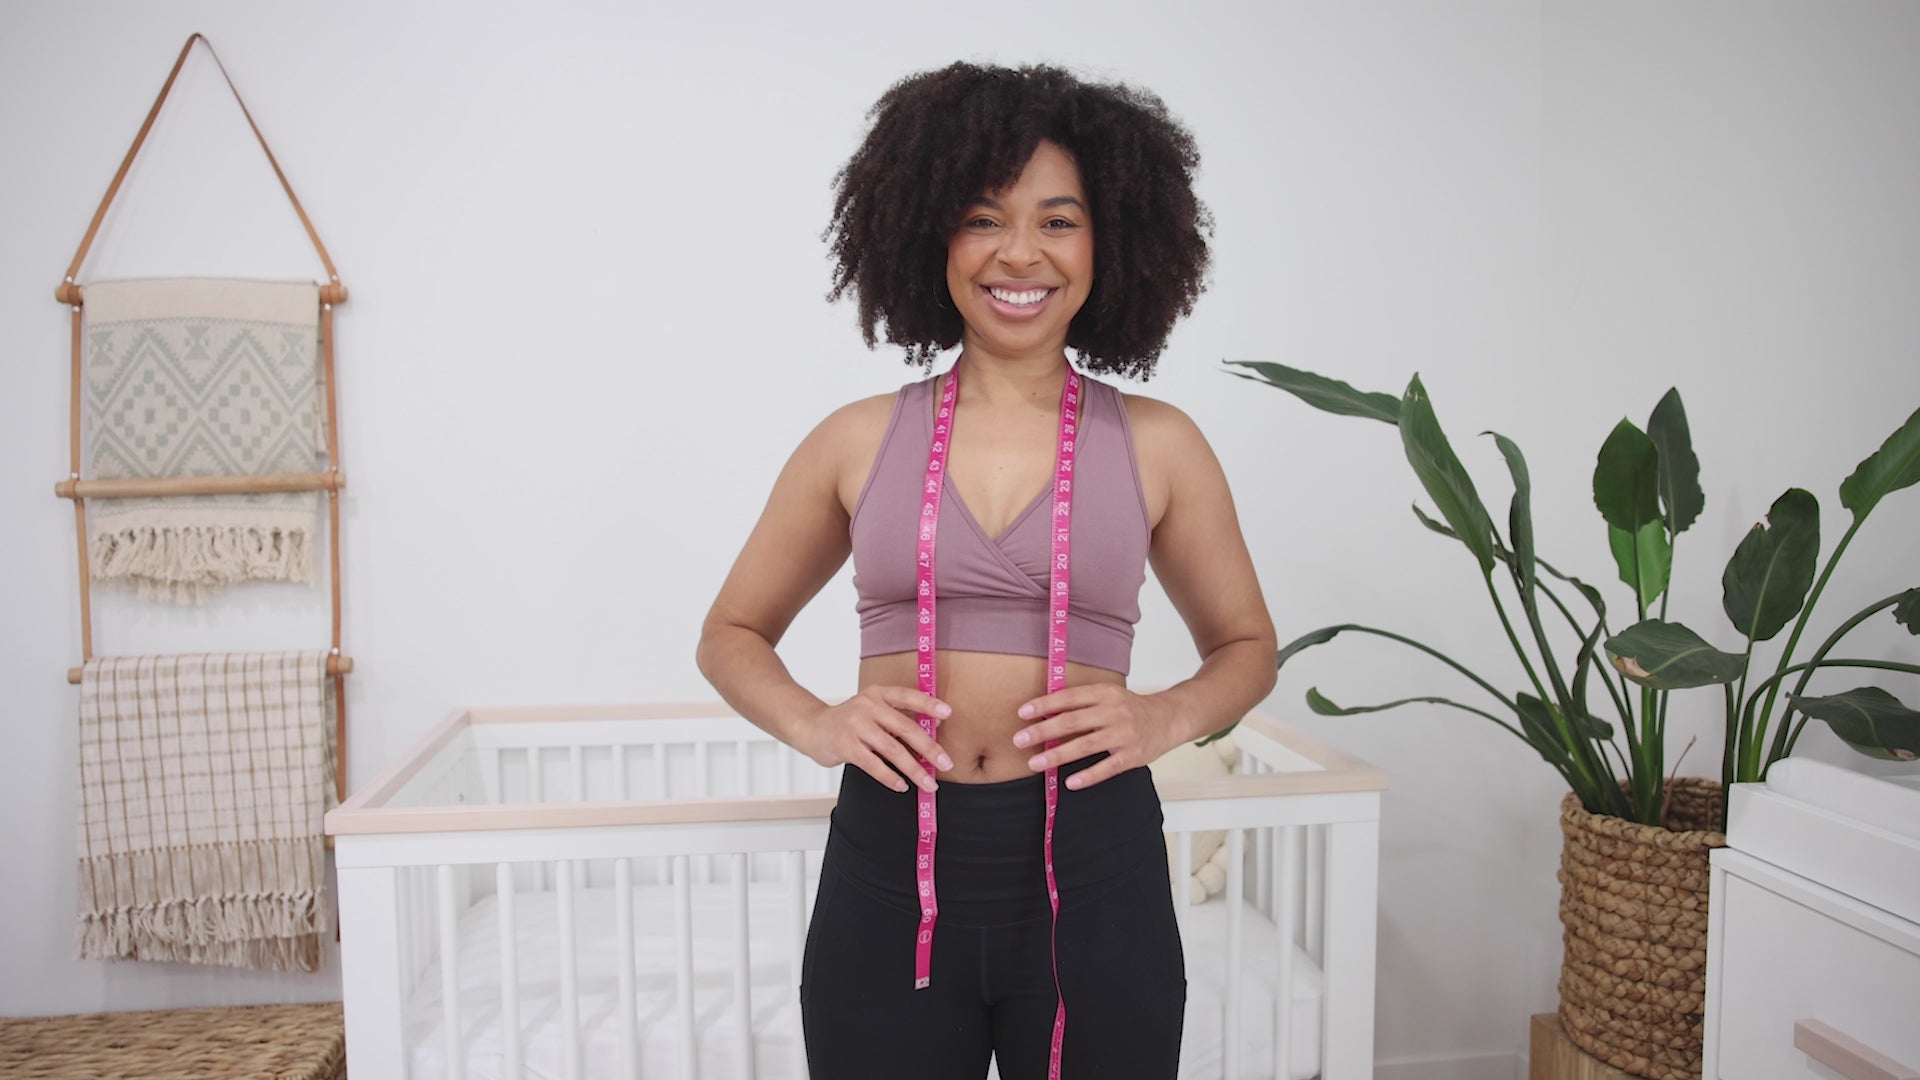 8 Important Tips To Choose The Right-Fit Pregnancy Bra